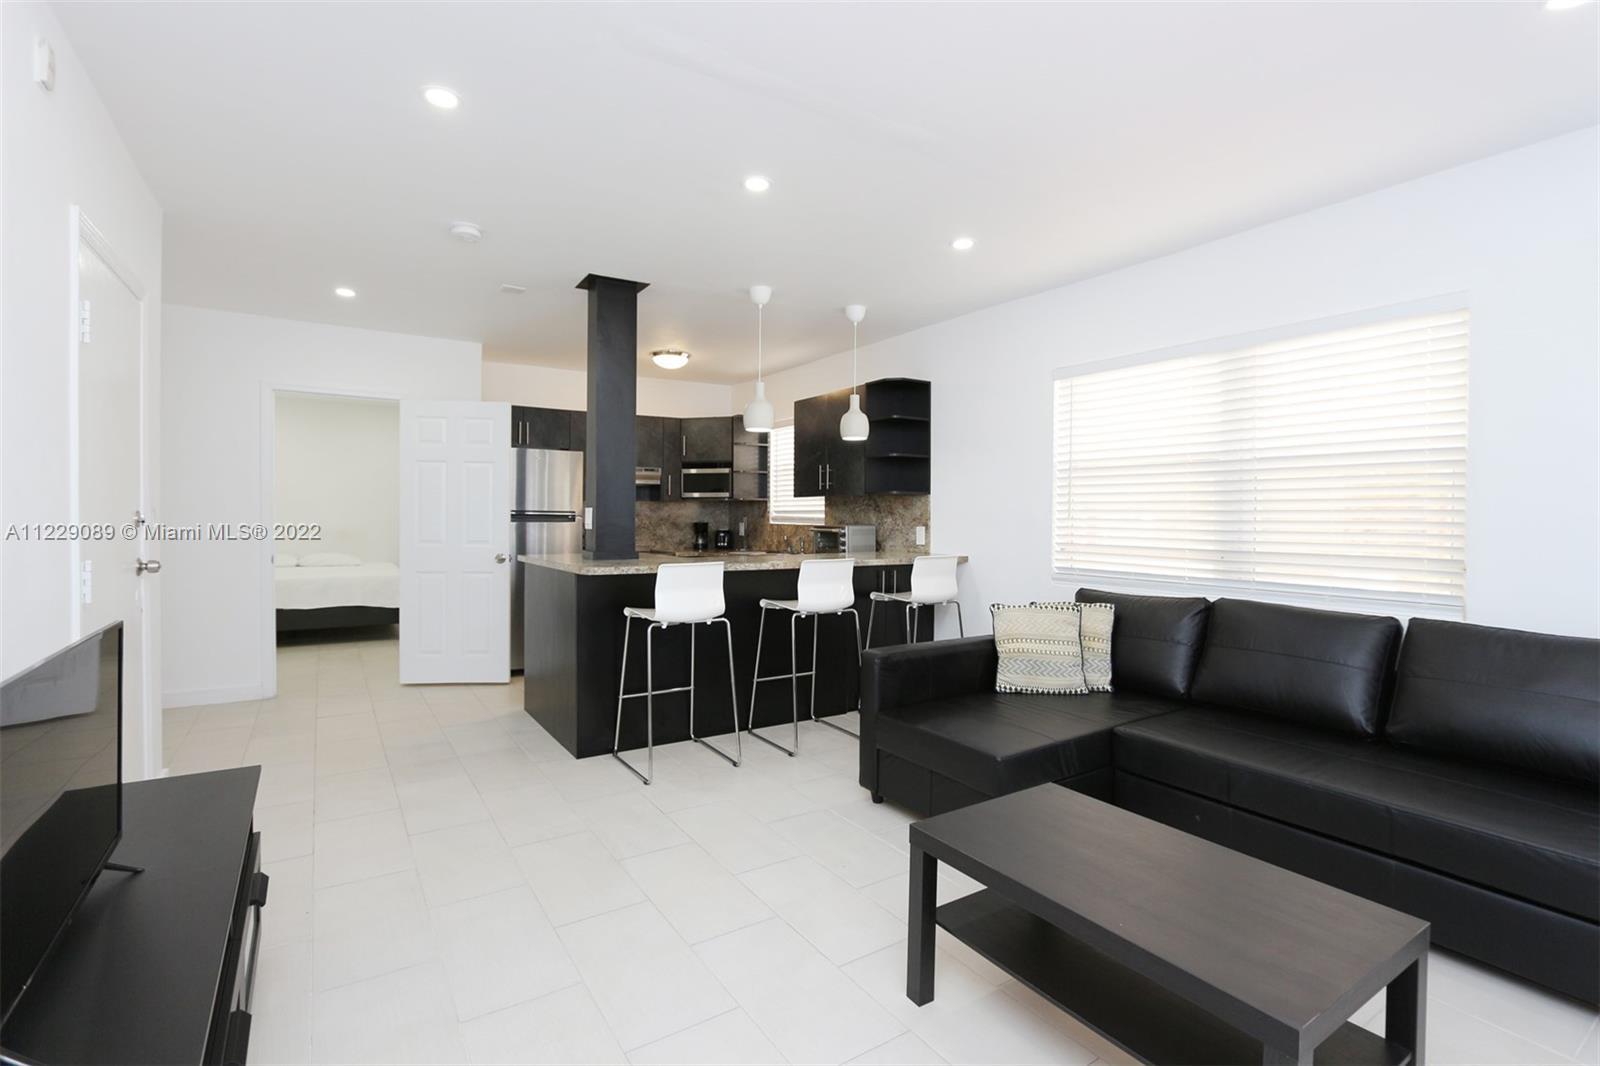 Fully Renovated Miami Beach Condo with 1 Bedroom/1 Bathroom in an excellent location. All stainless 